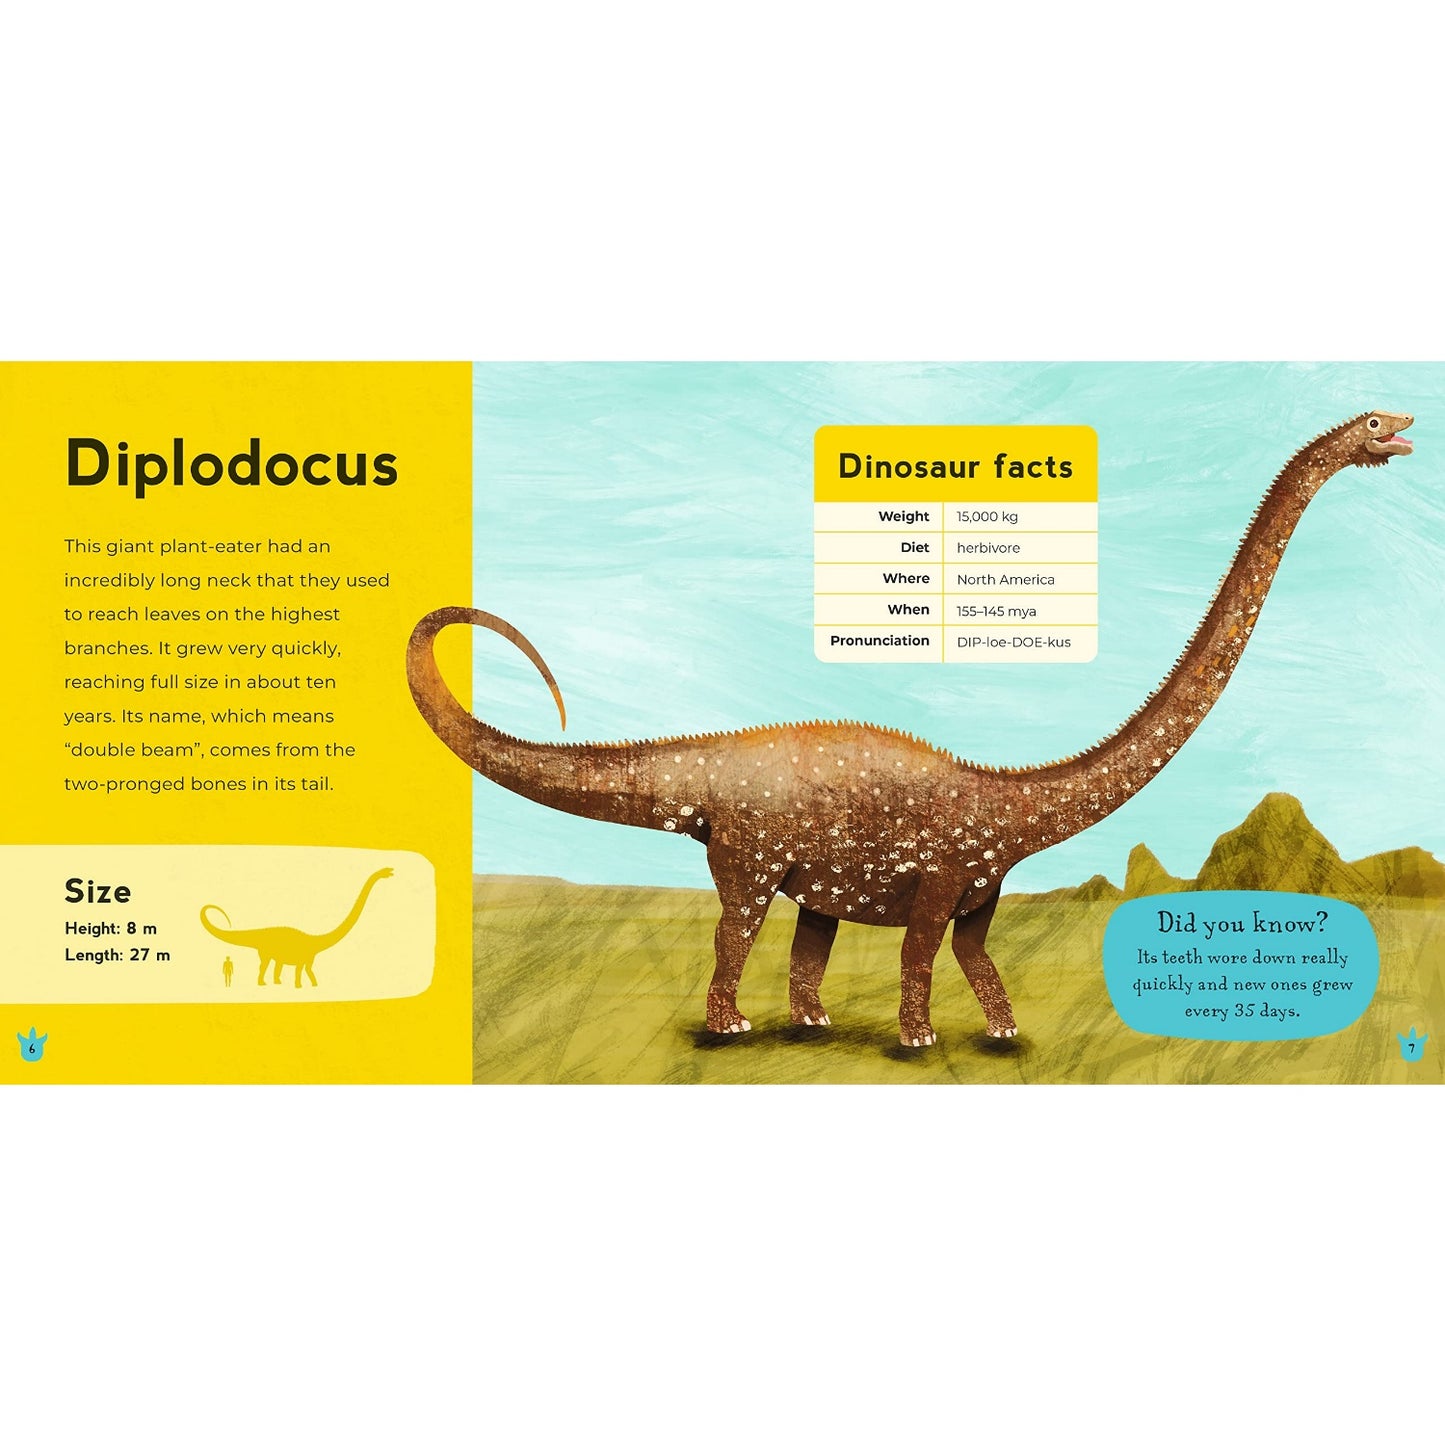 My First Book of Dinosaurs | Hardcover | Children's Book on Dinosaurs